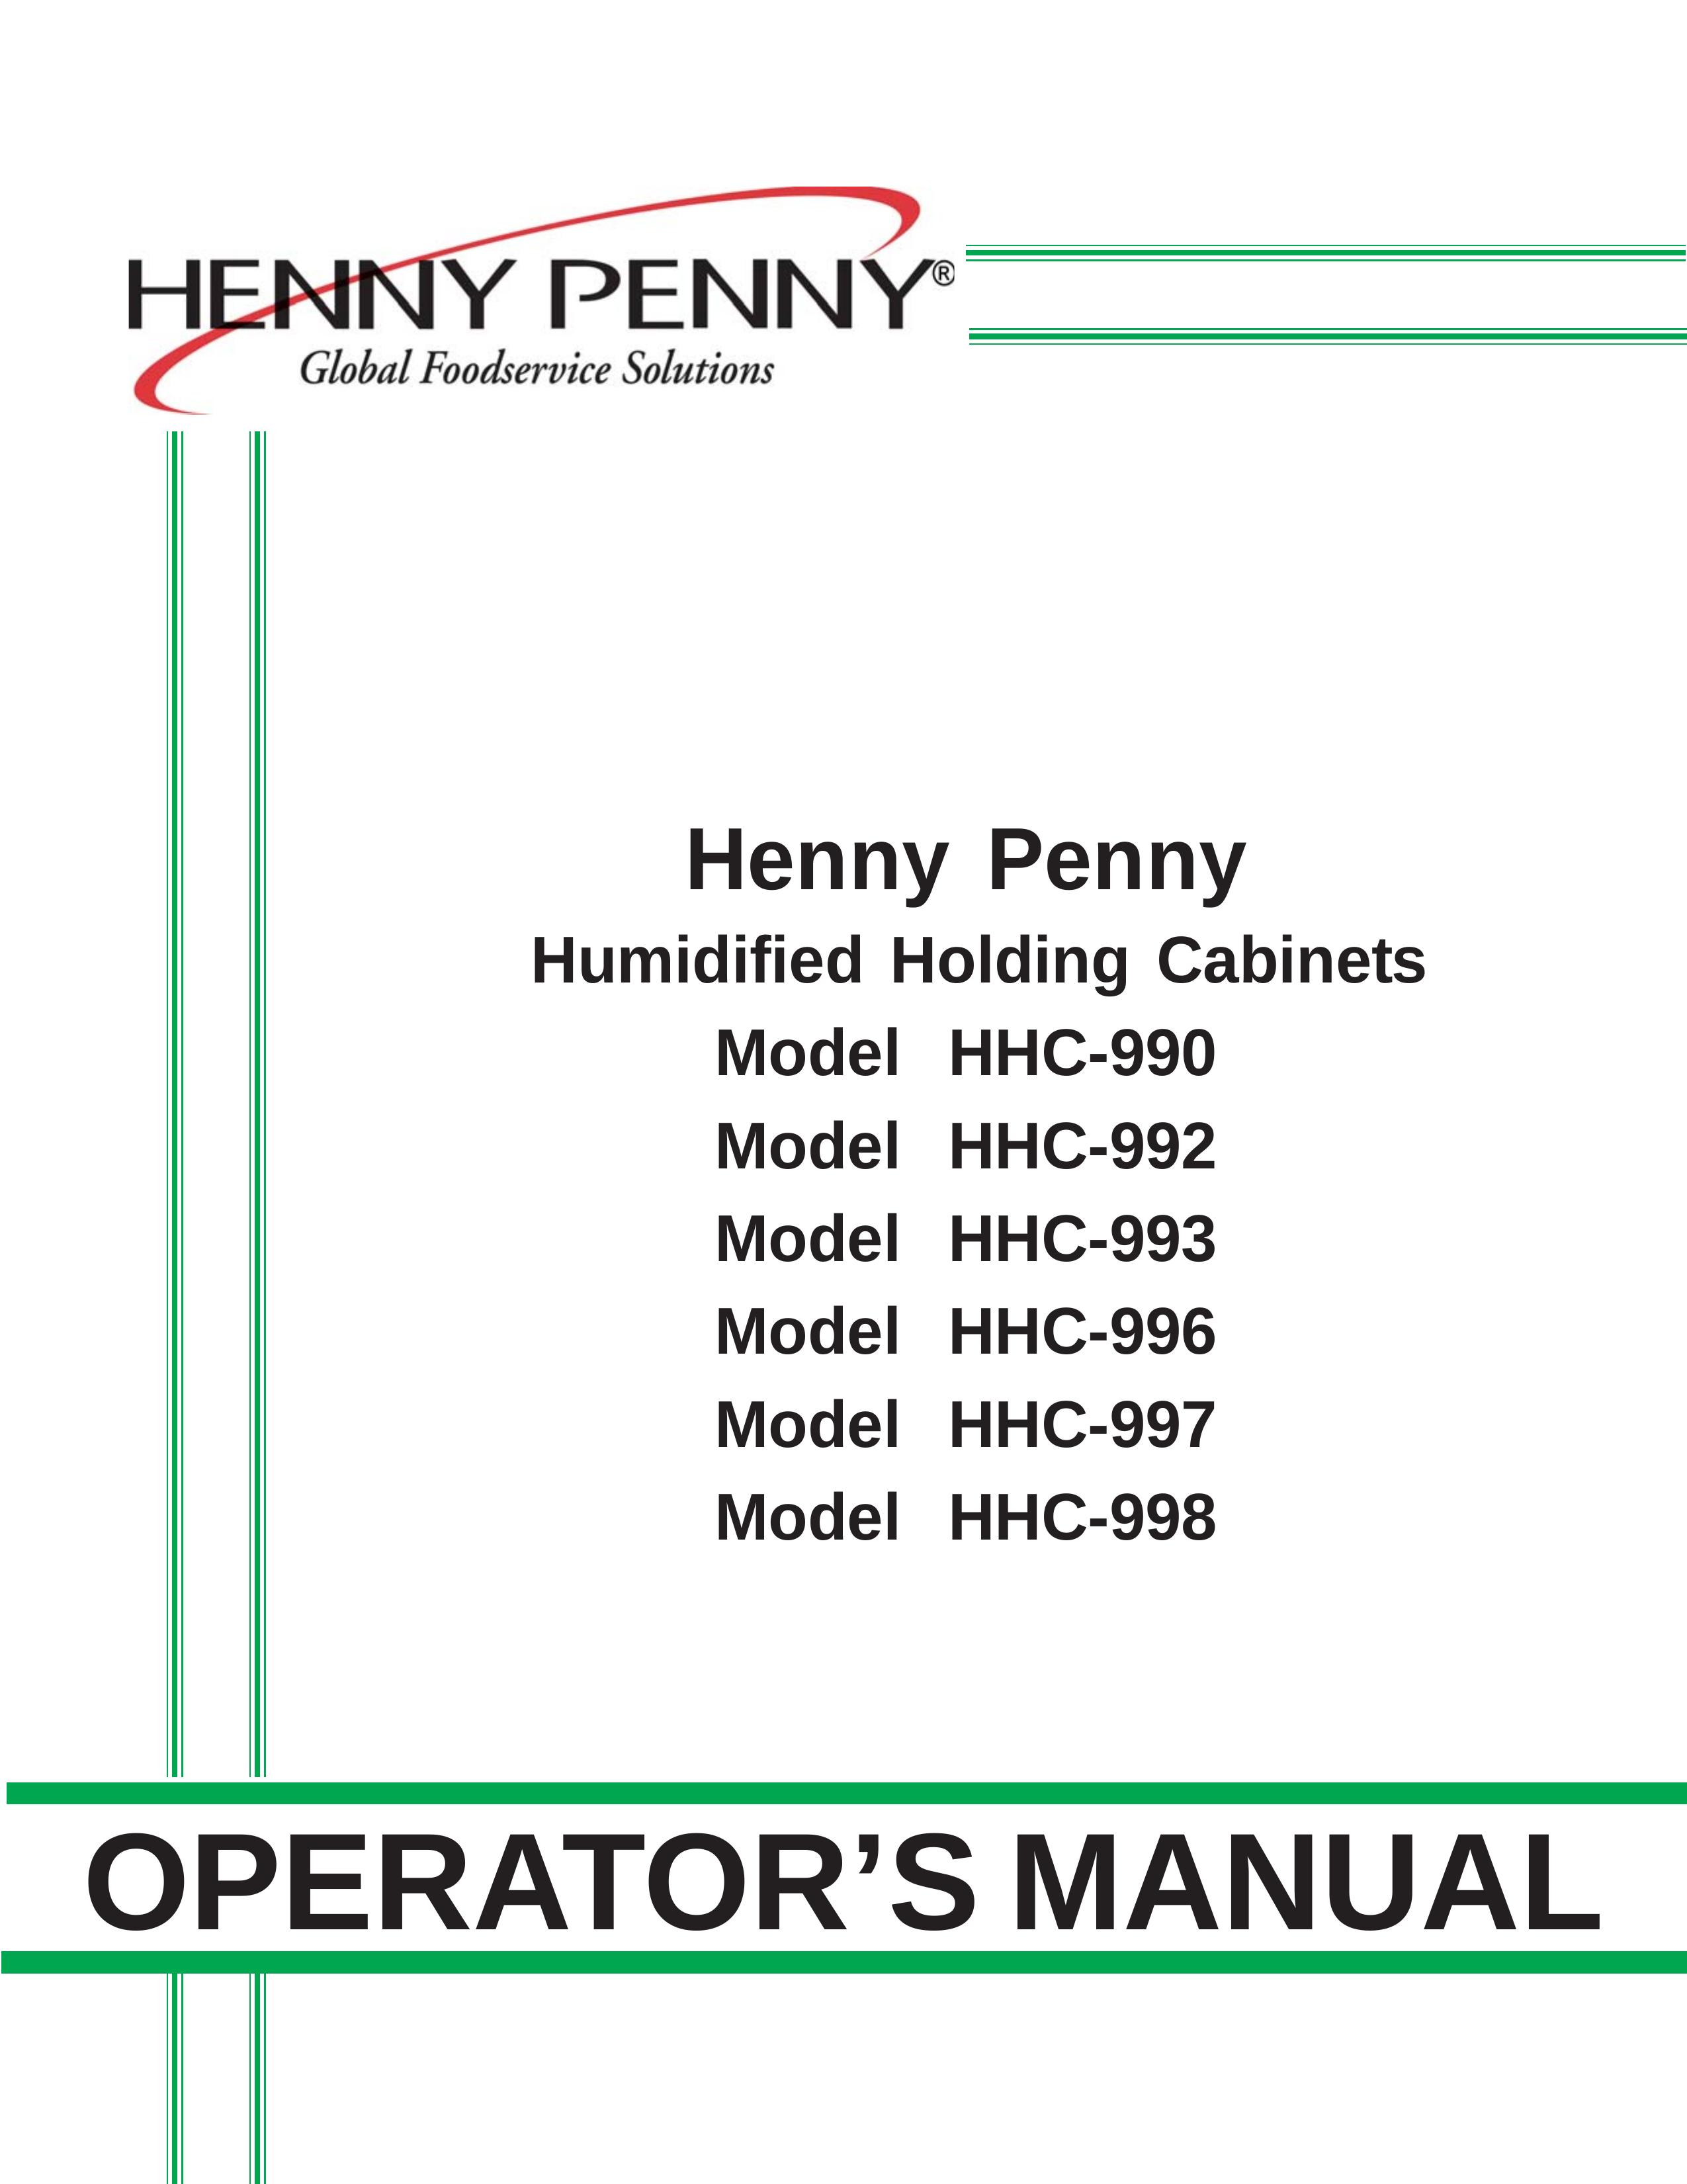 Henny Penny HHC-993 Clothes Dryer User Manual